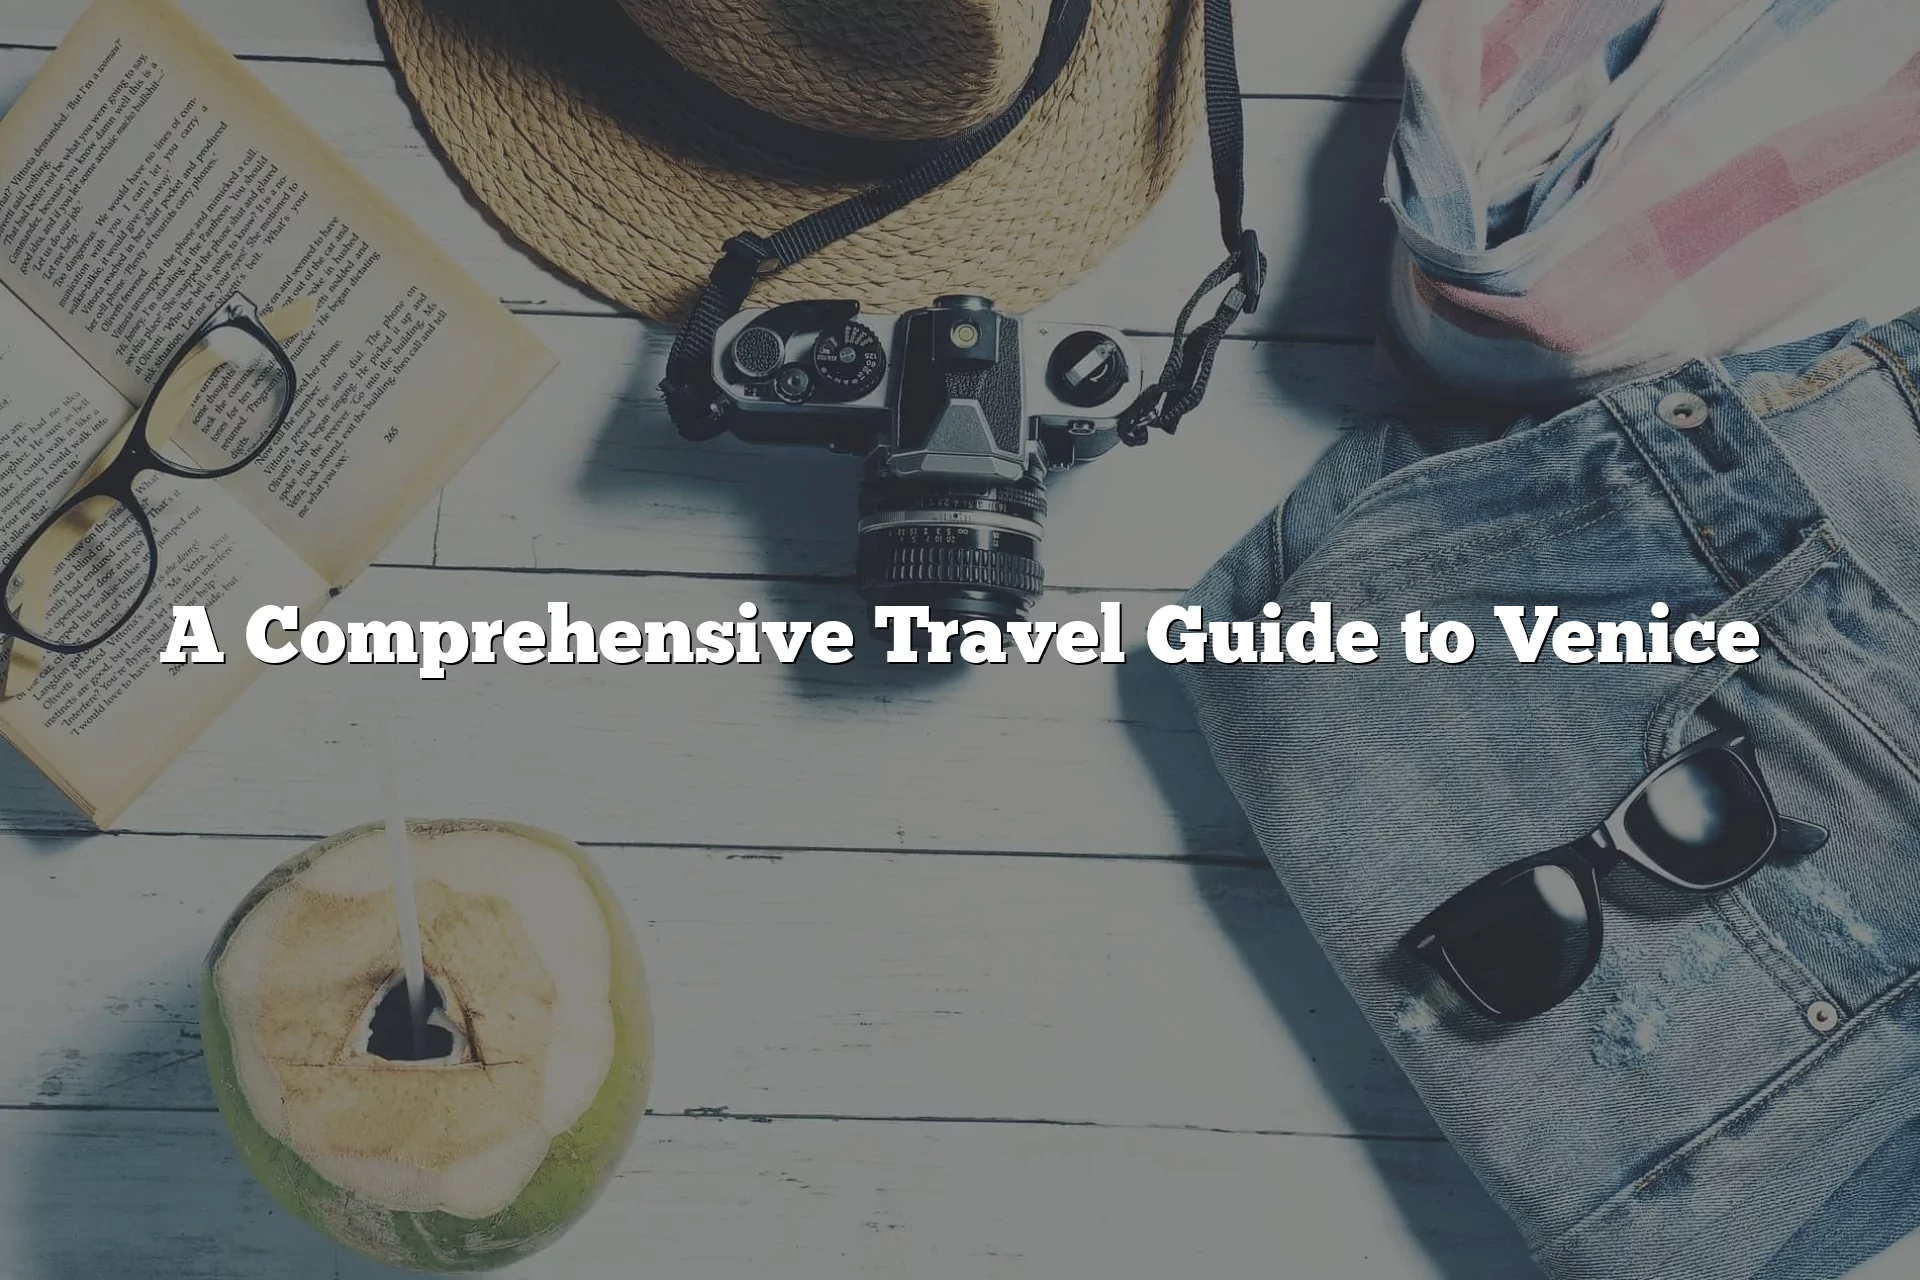 A Comprehensive Travel Guide to Venice